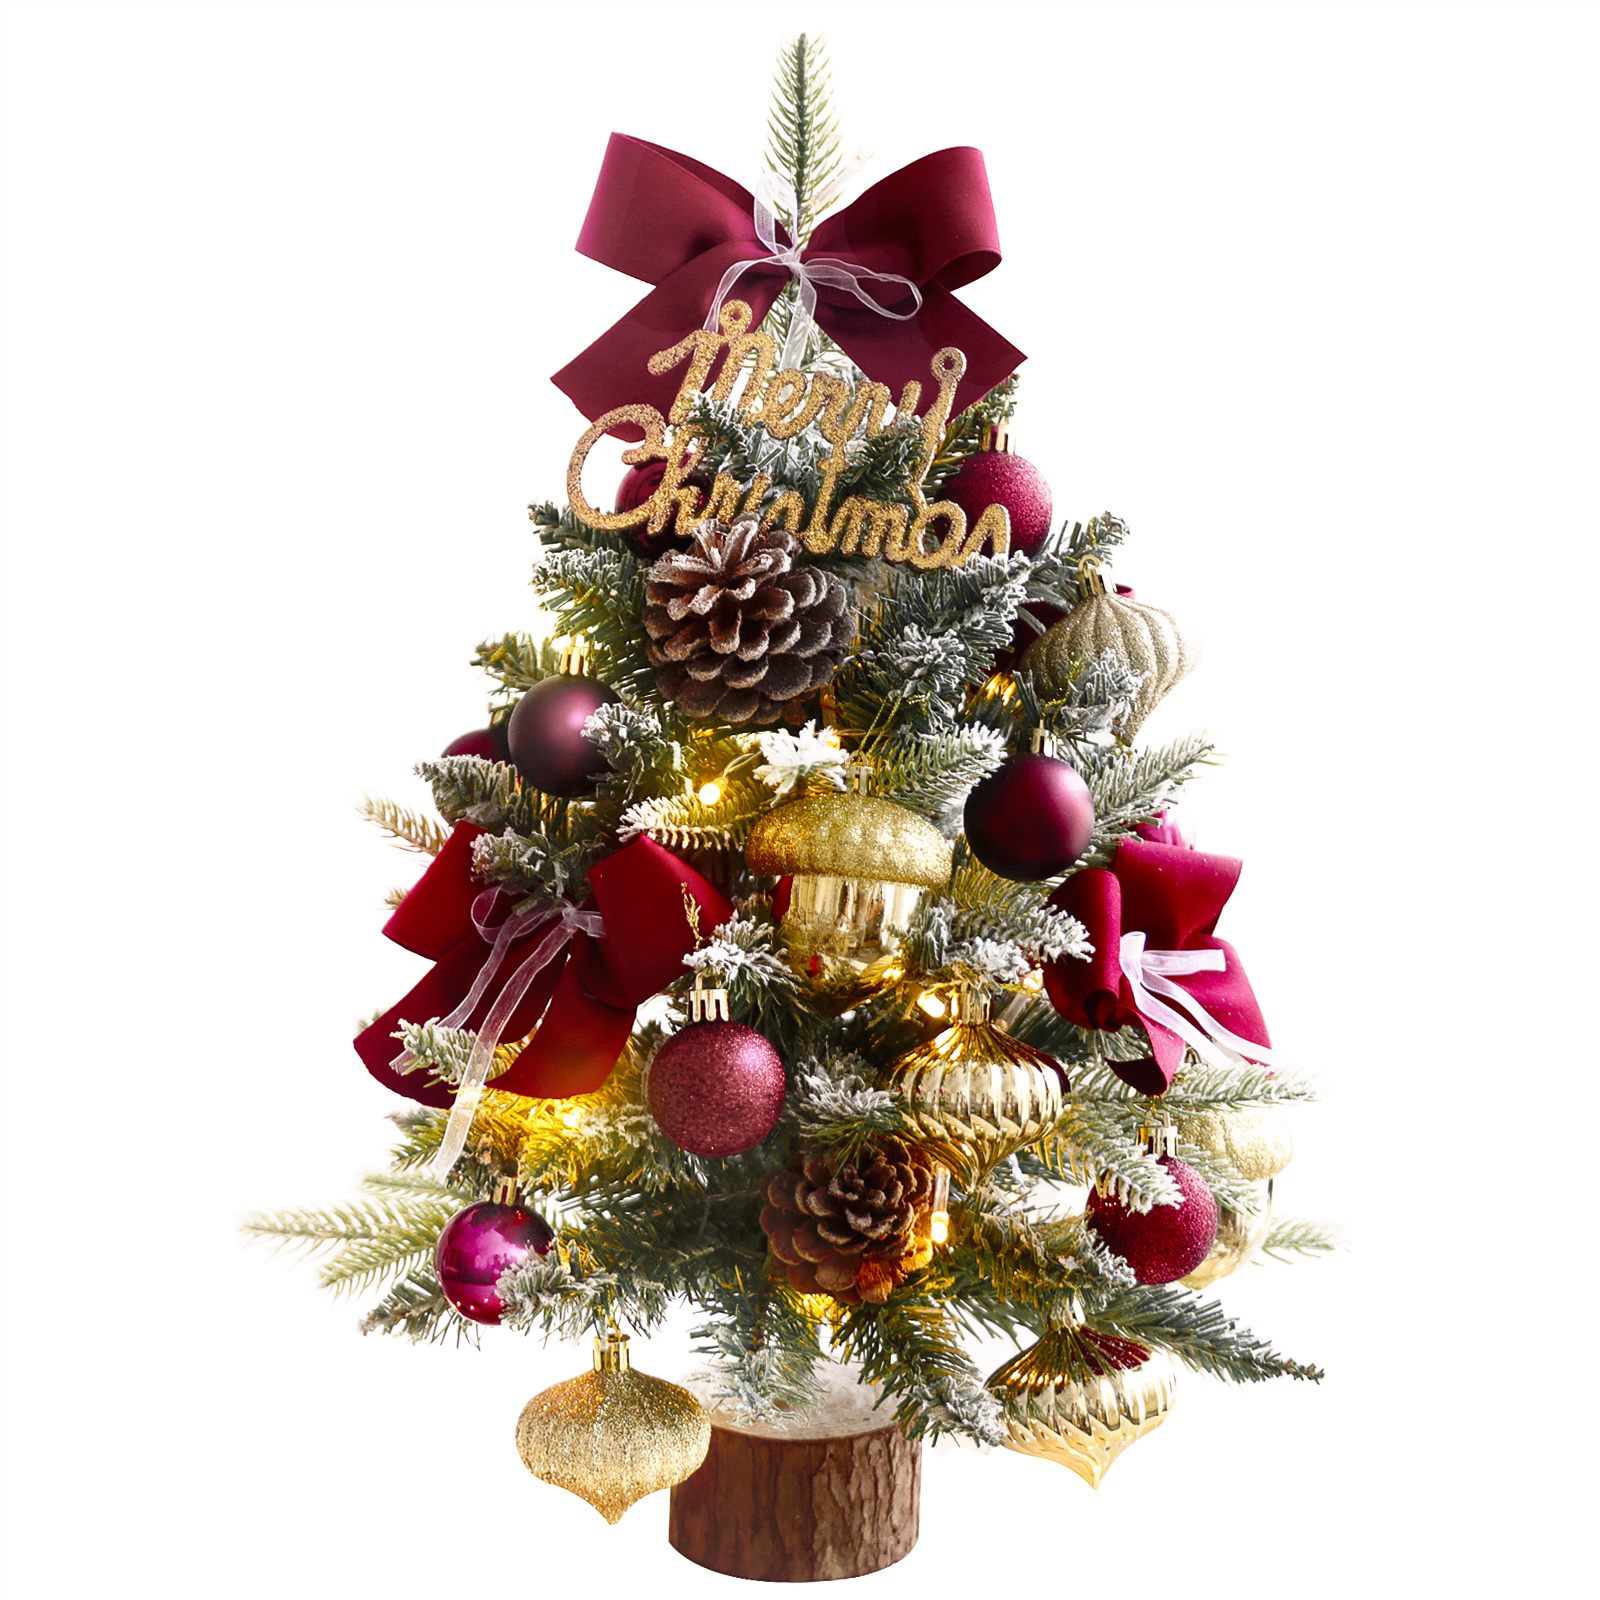 1.5FT Small Christmas Tree with 10FT Lights Table Top Mini Christmas Tree Artificial Flocked Xmas Decorations for Living Room Bedroom Office Shop